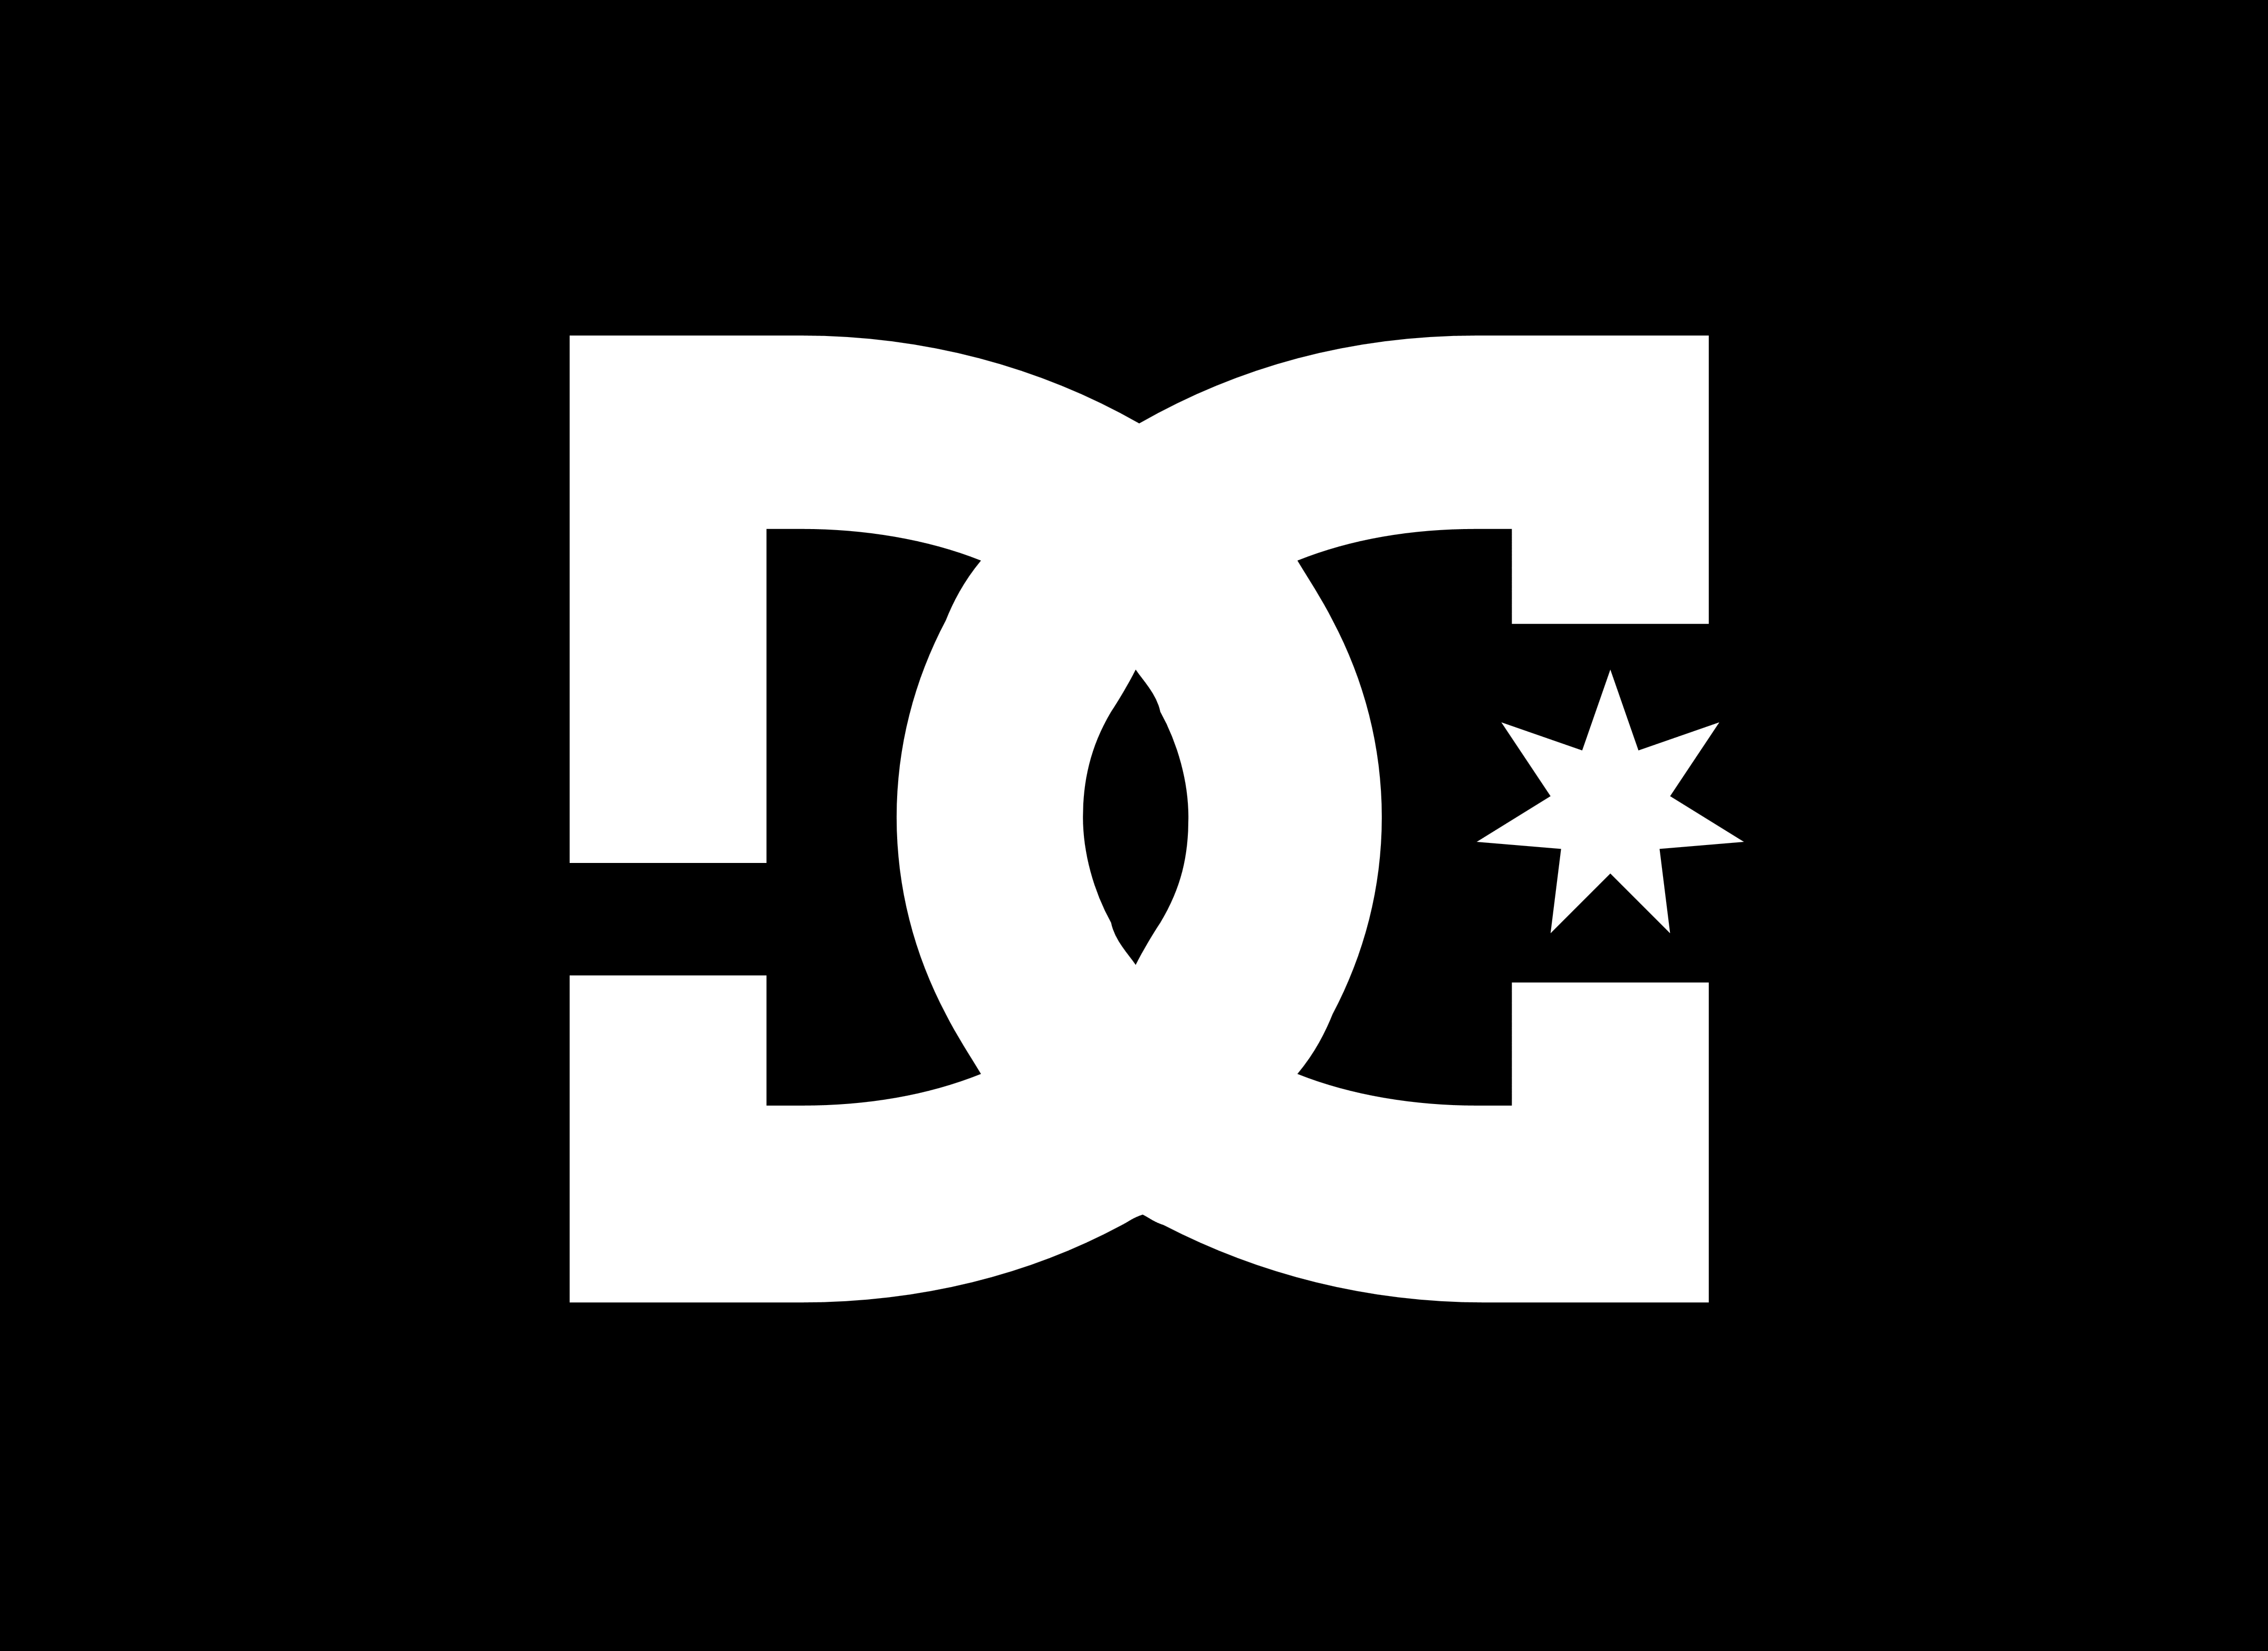 DC Shoes Coupons & Promo Codes